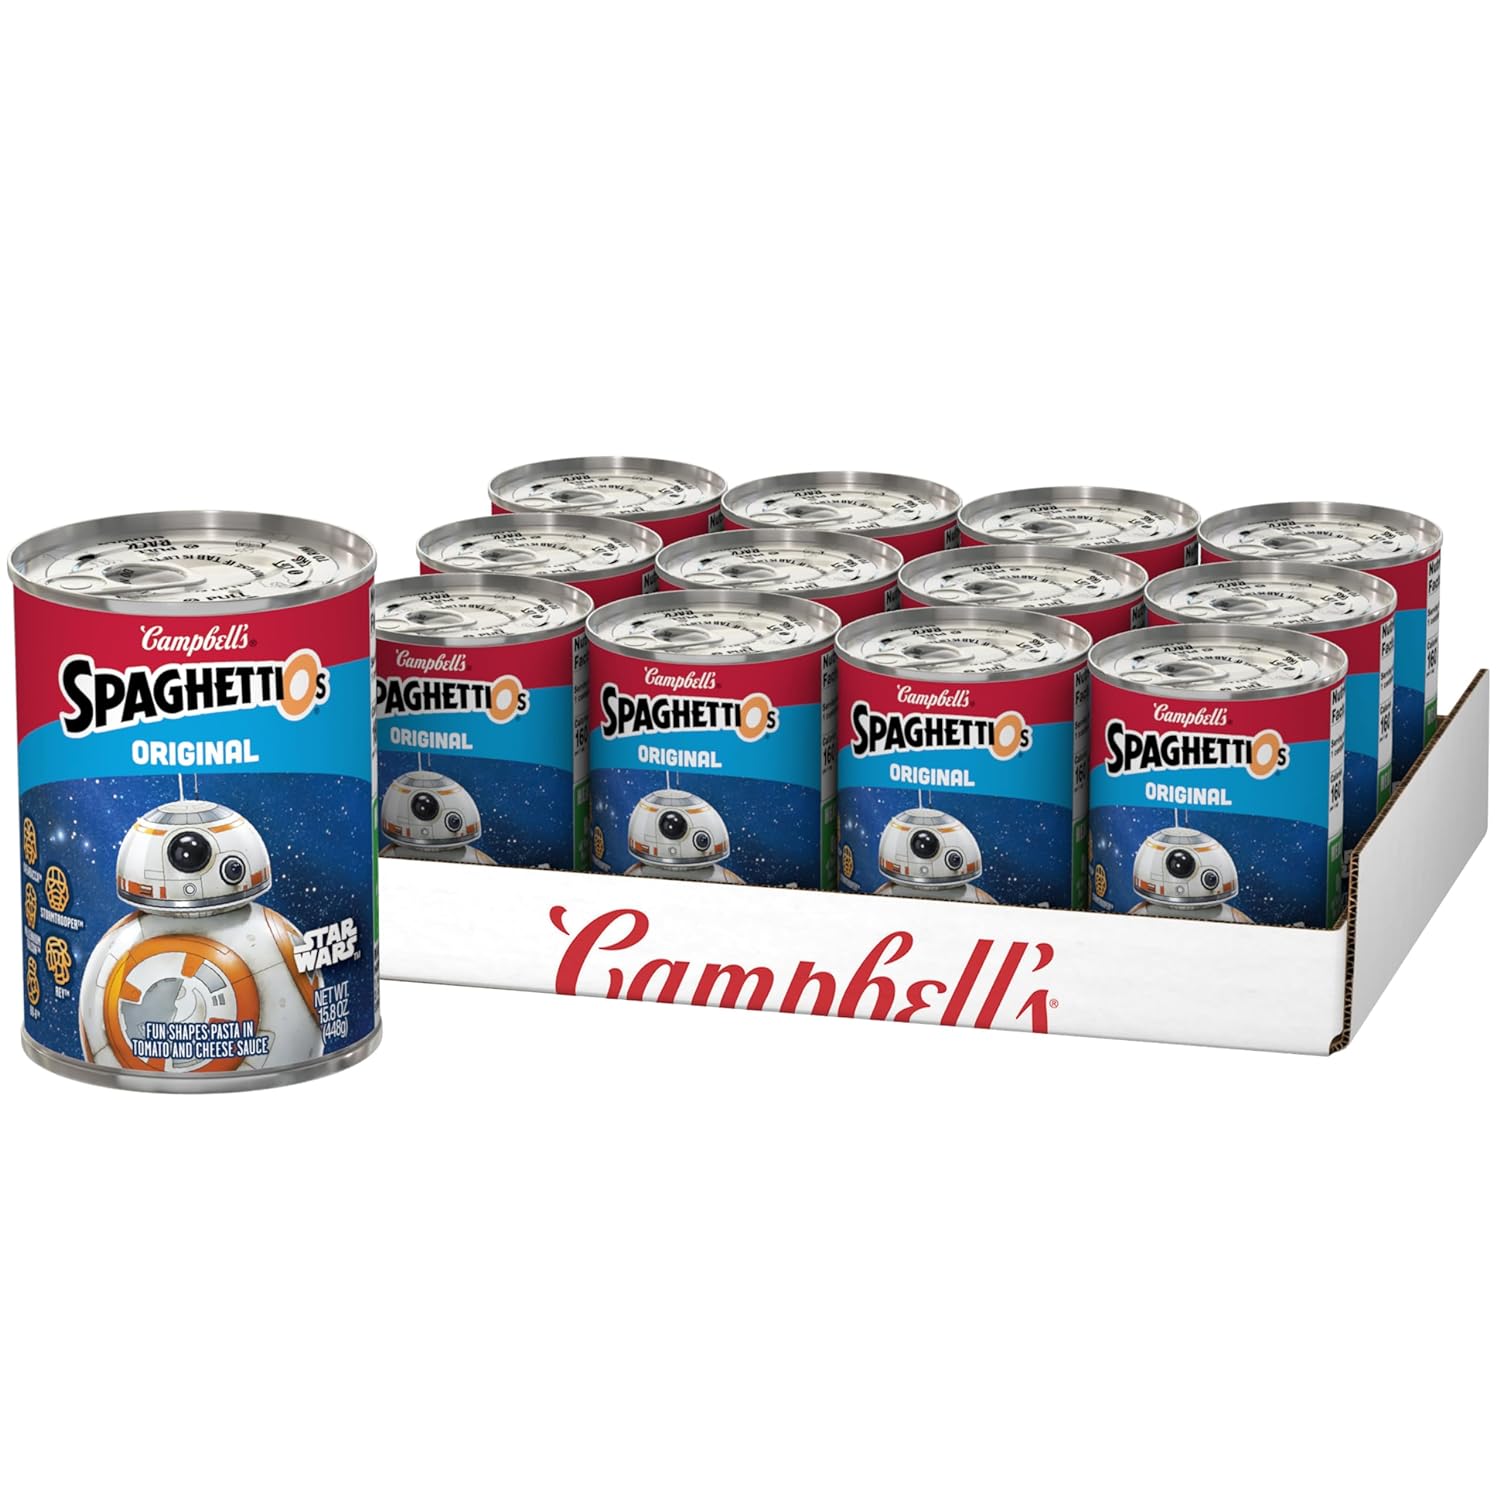 SpaghettiOs Original Star Wars Shaped Canned Pasta, 15.8 oz Can (Pack of 12)